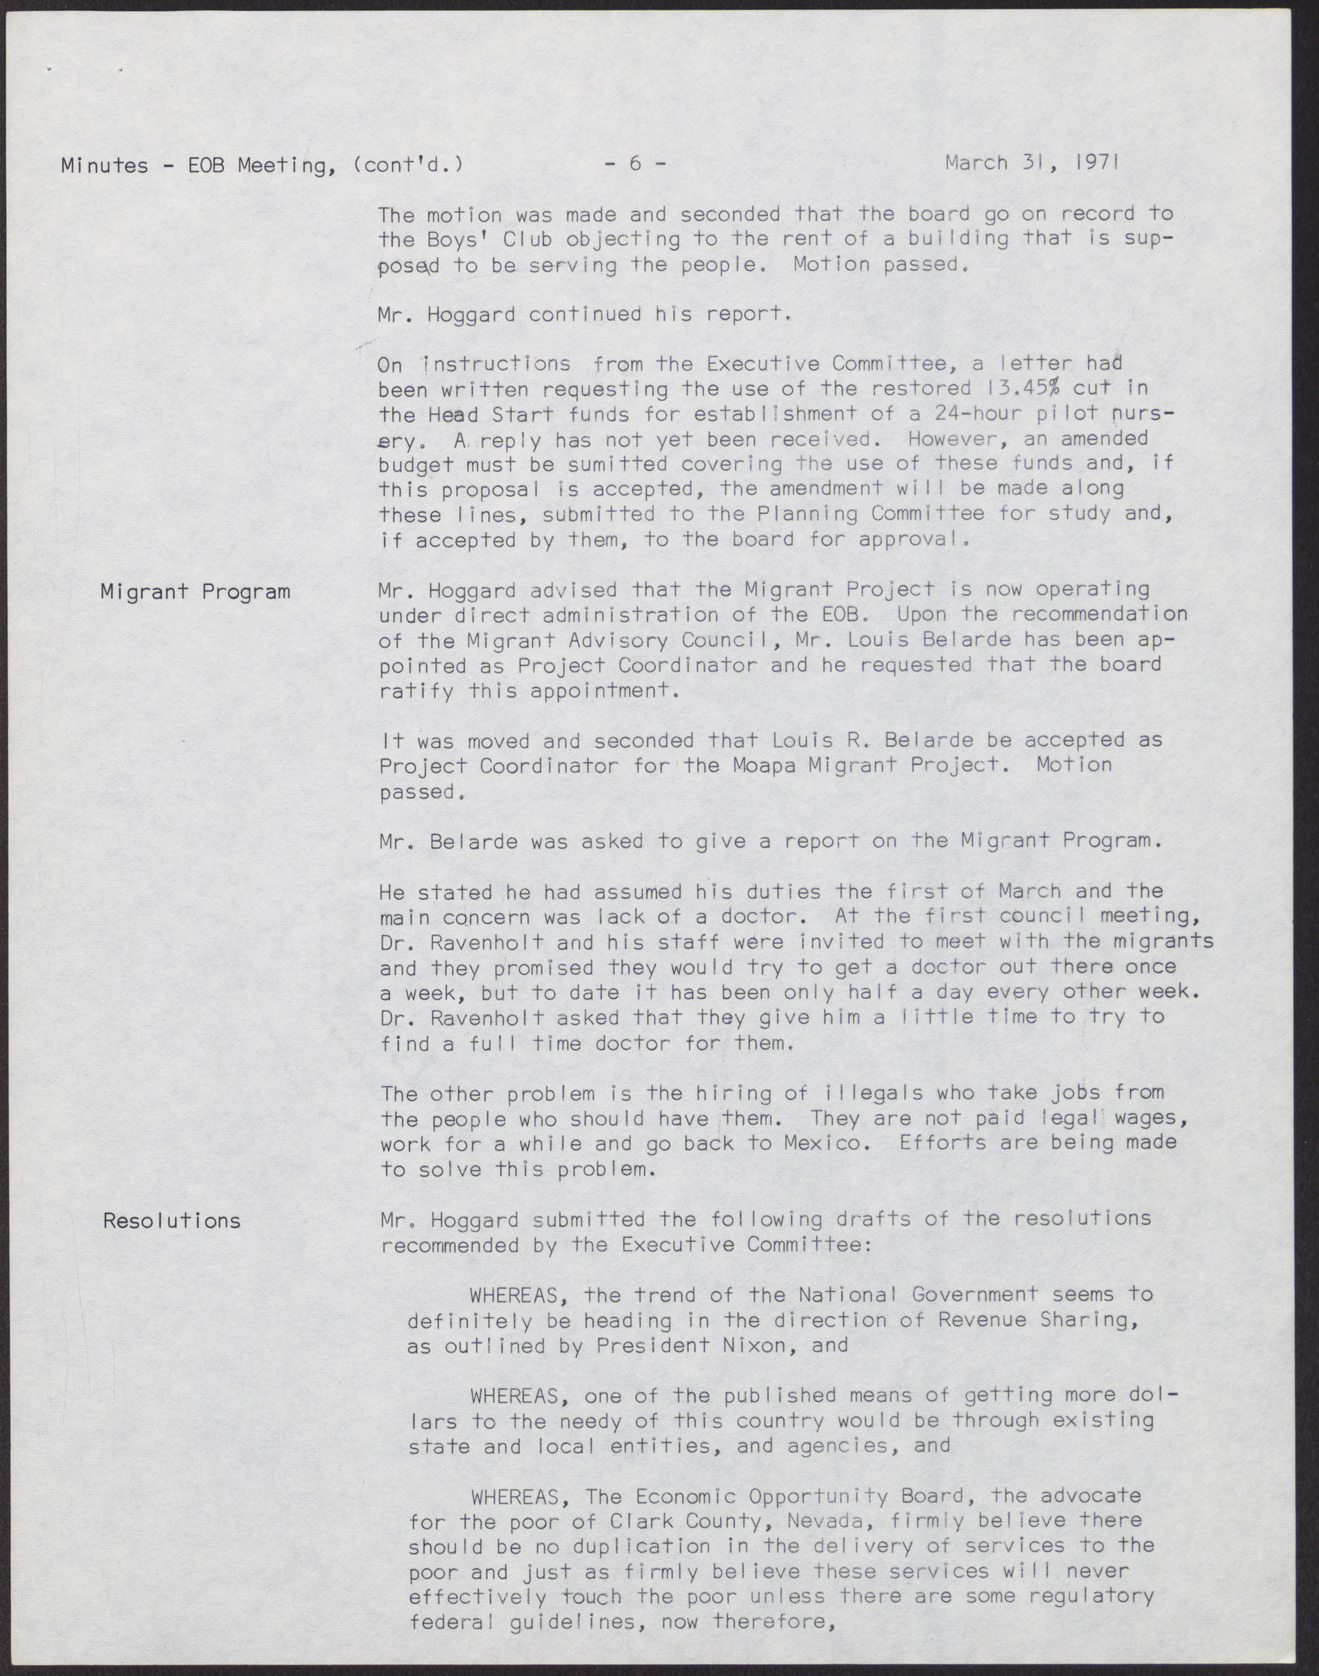 Minutes from Economic Opportunity Board meeting (9 pages), March 31, 1971, page 6